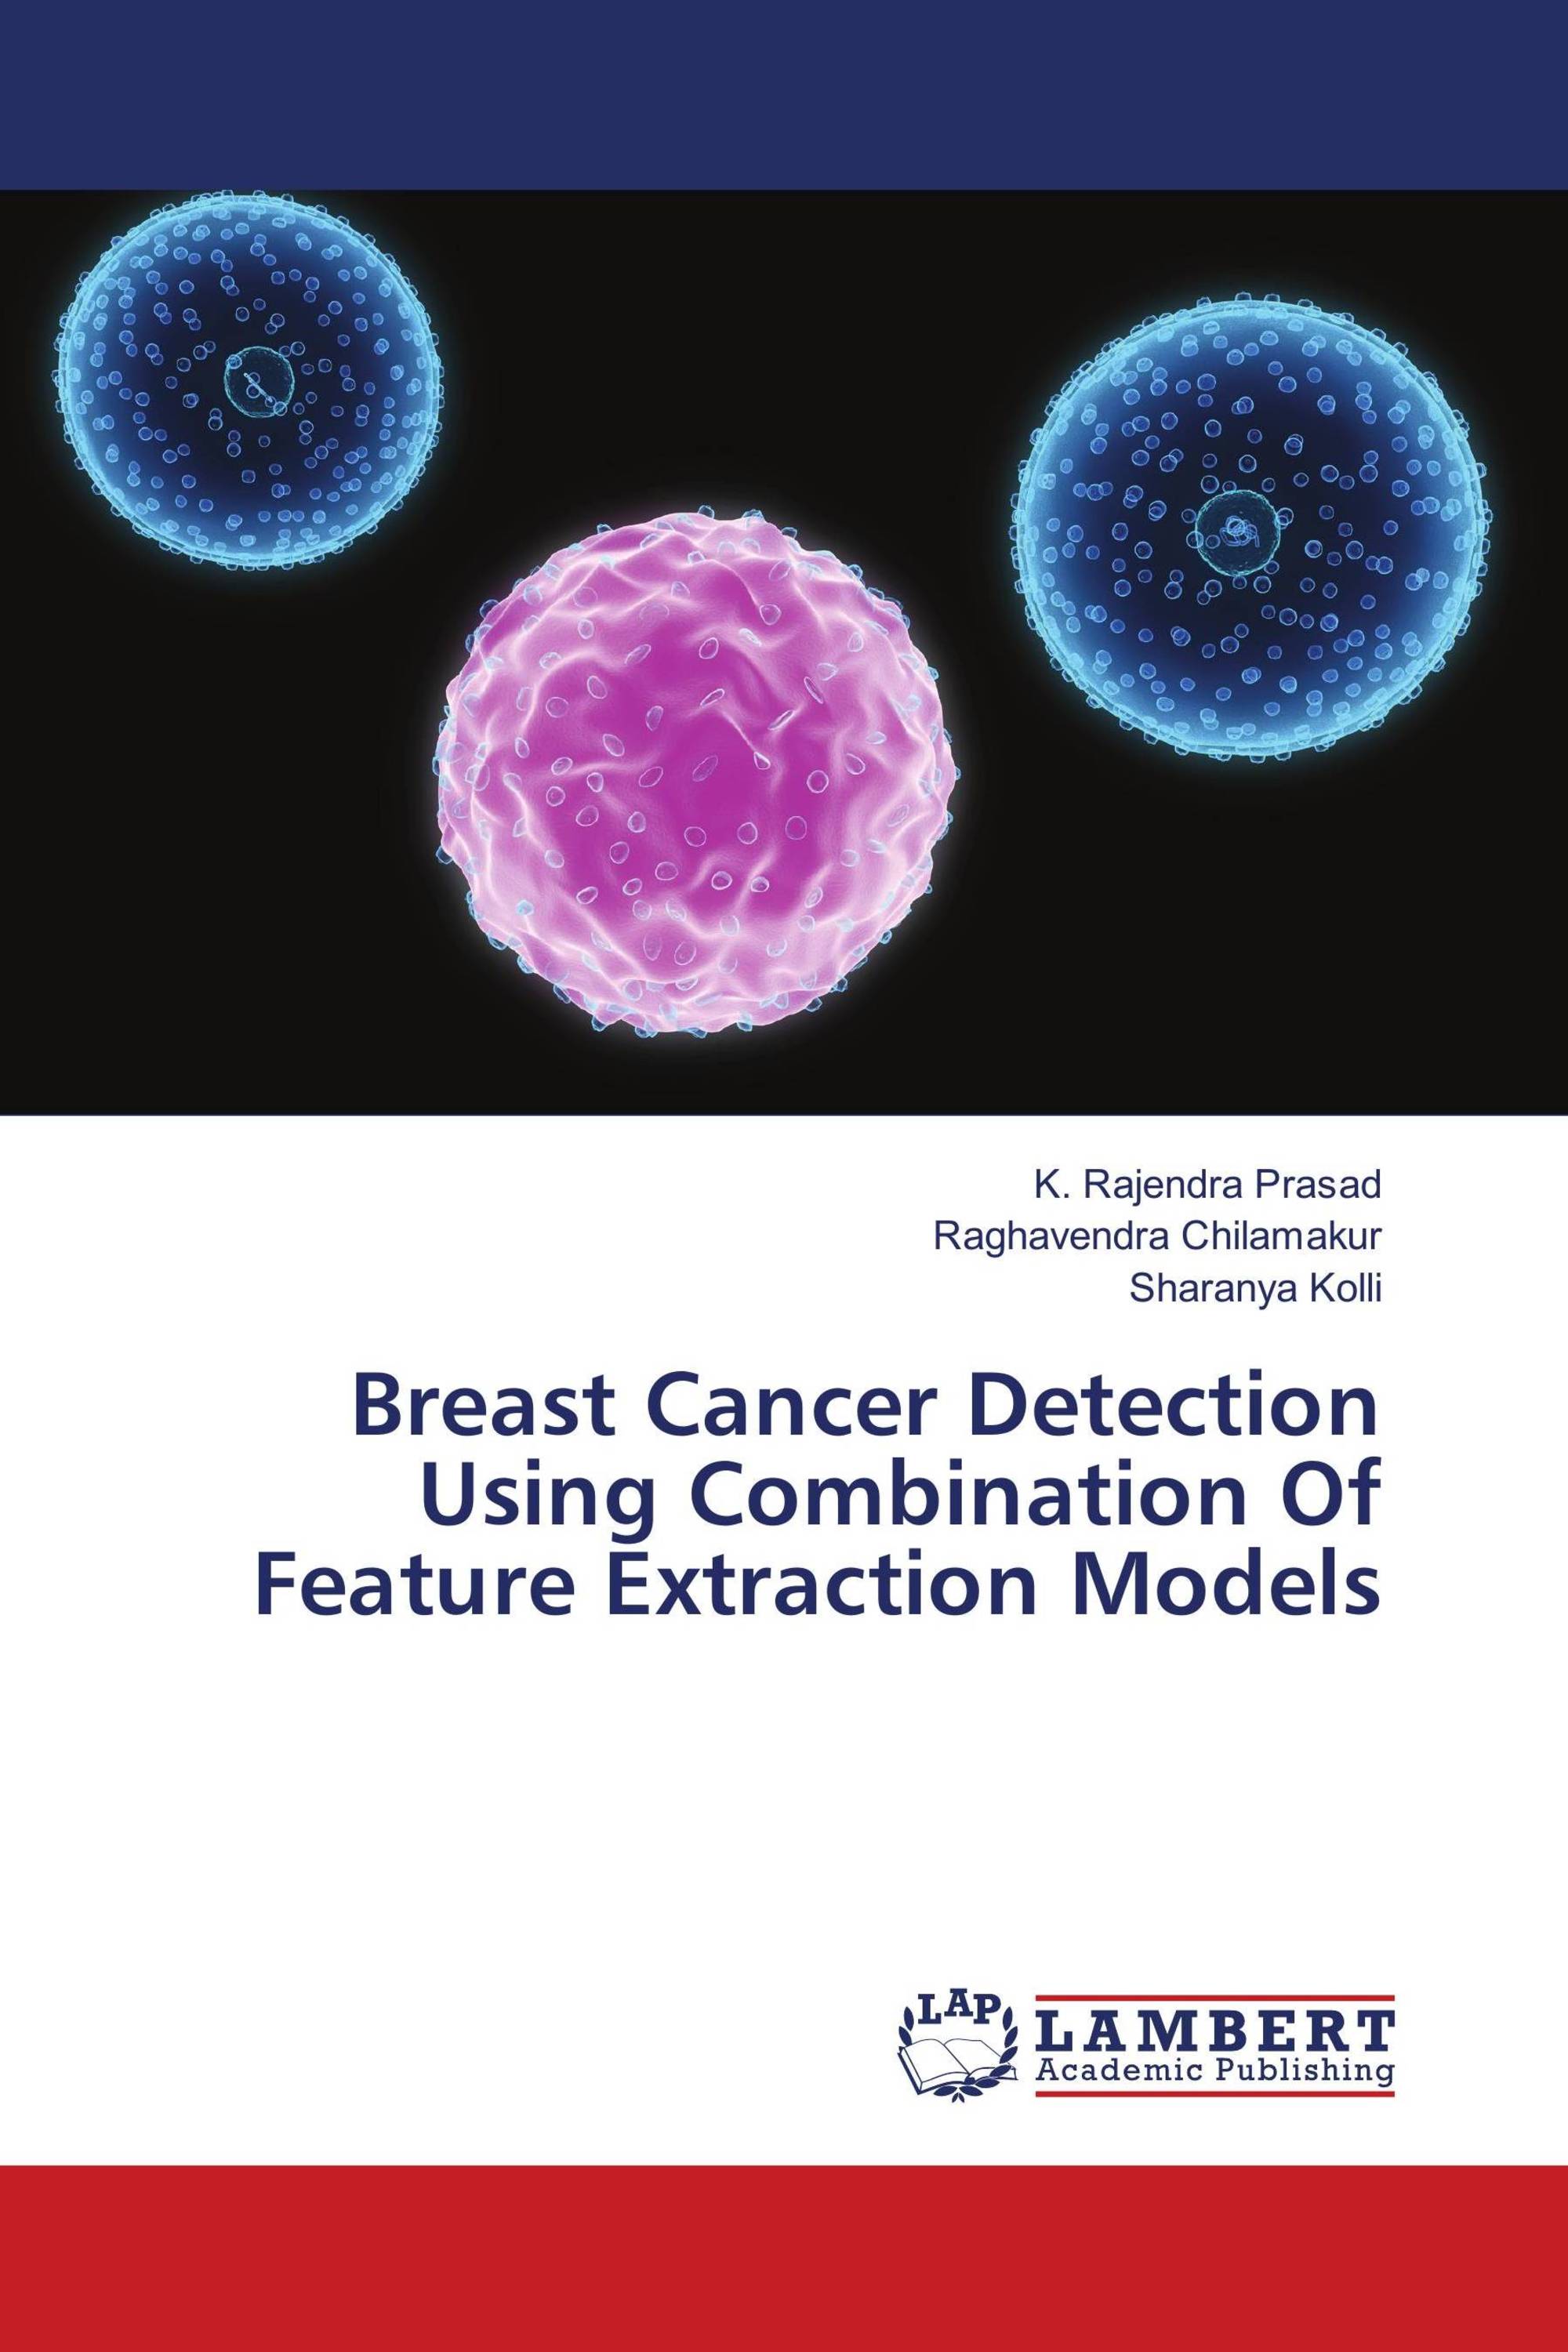 Breast Cancer Detection using Combination of Feature Extraction Models